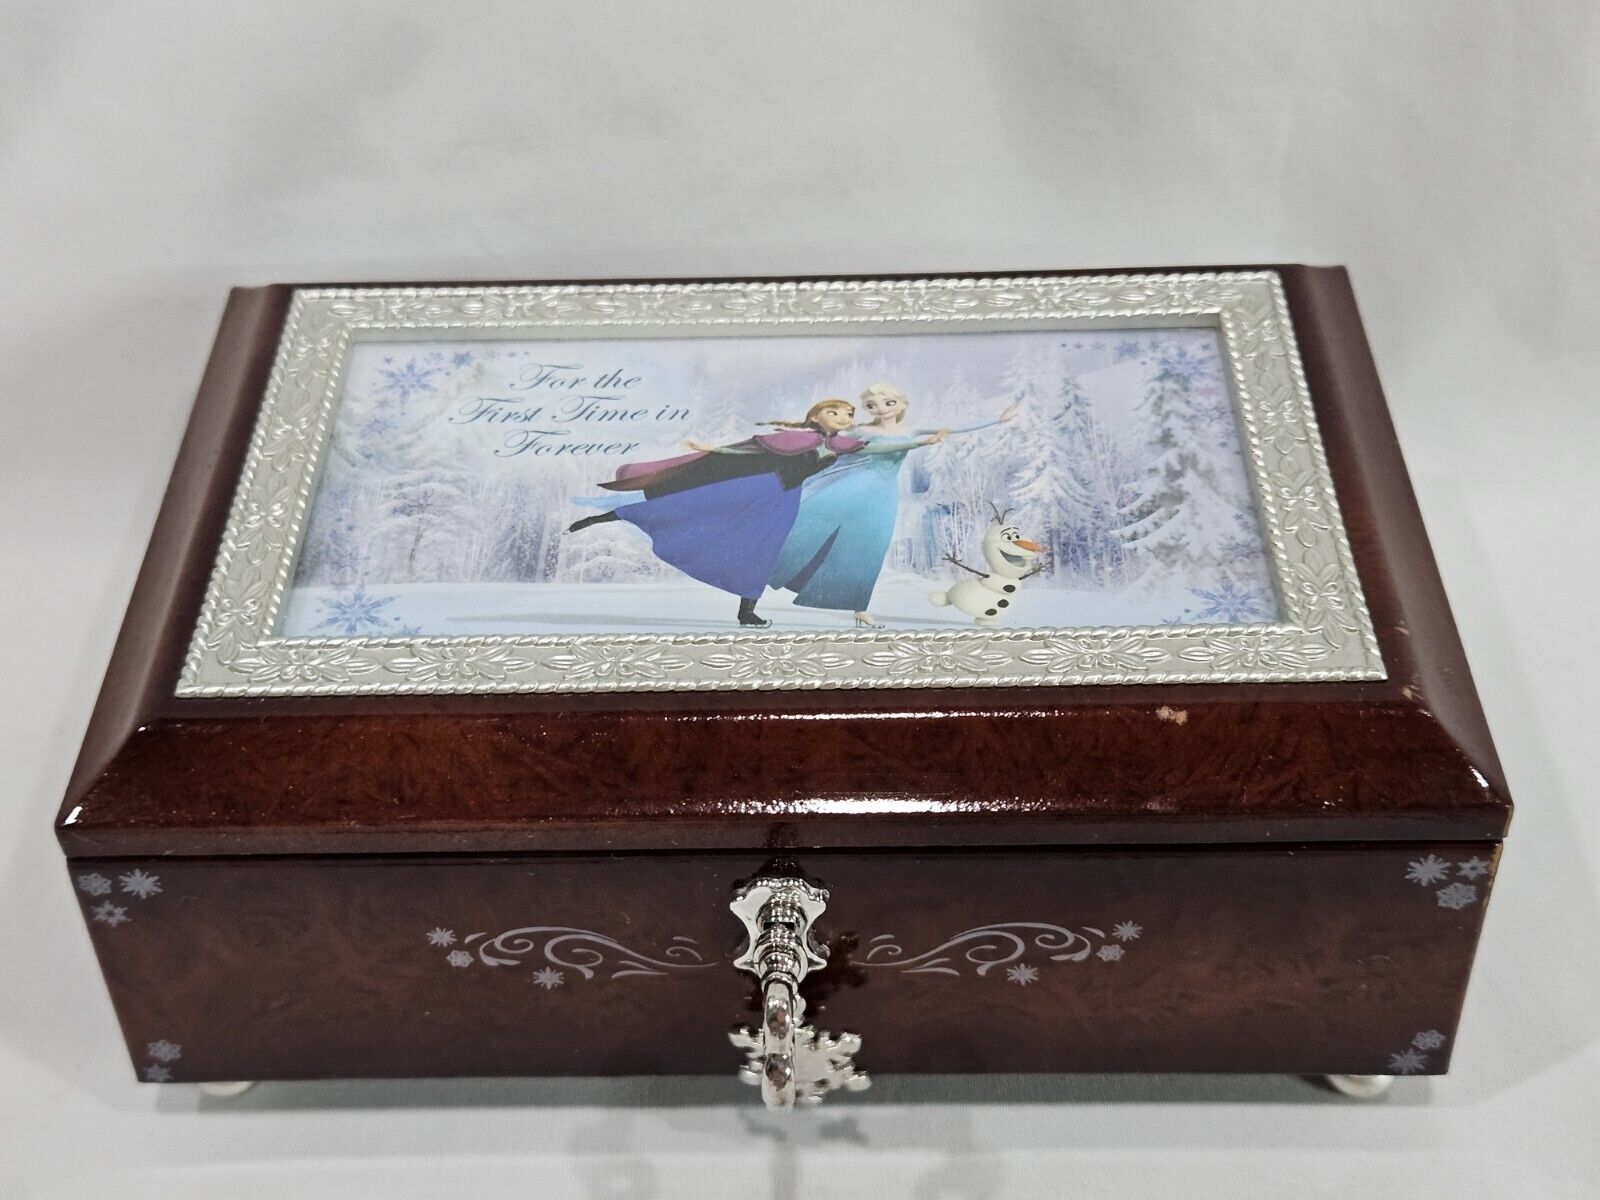 Bradford Exchange Disney Frozen Jewelry Music Box- For the First Time in Forever